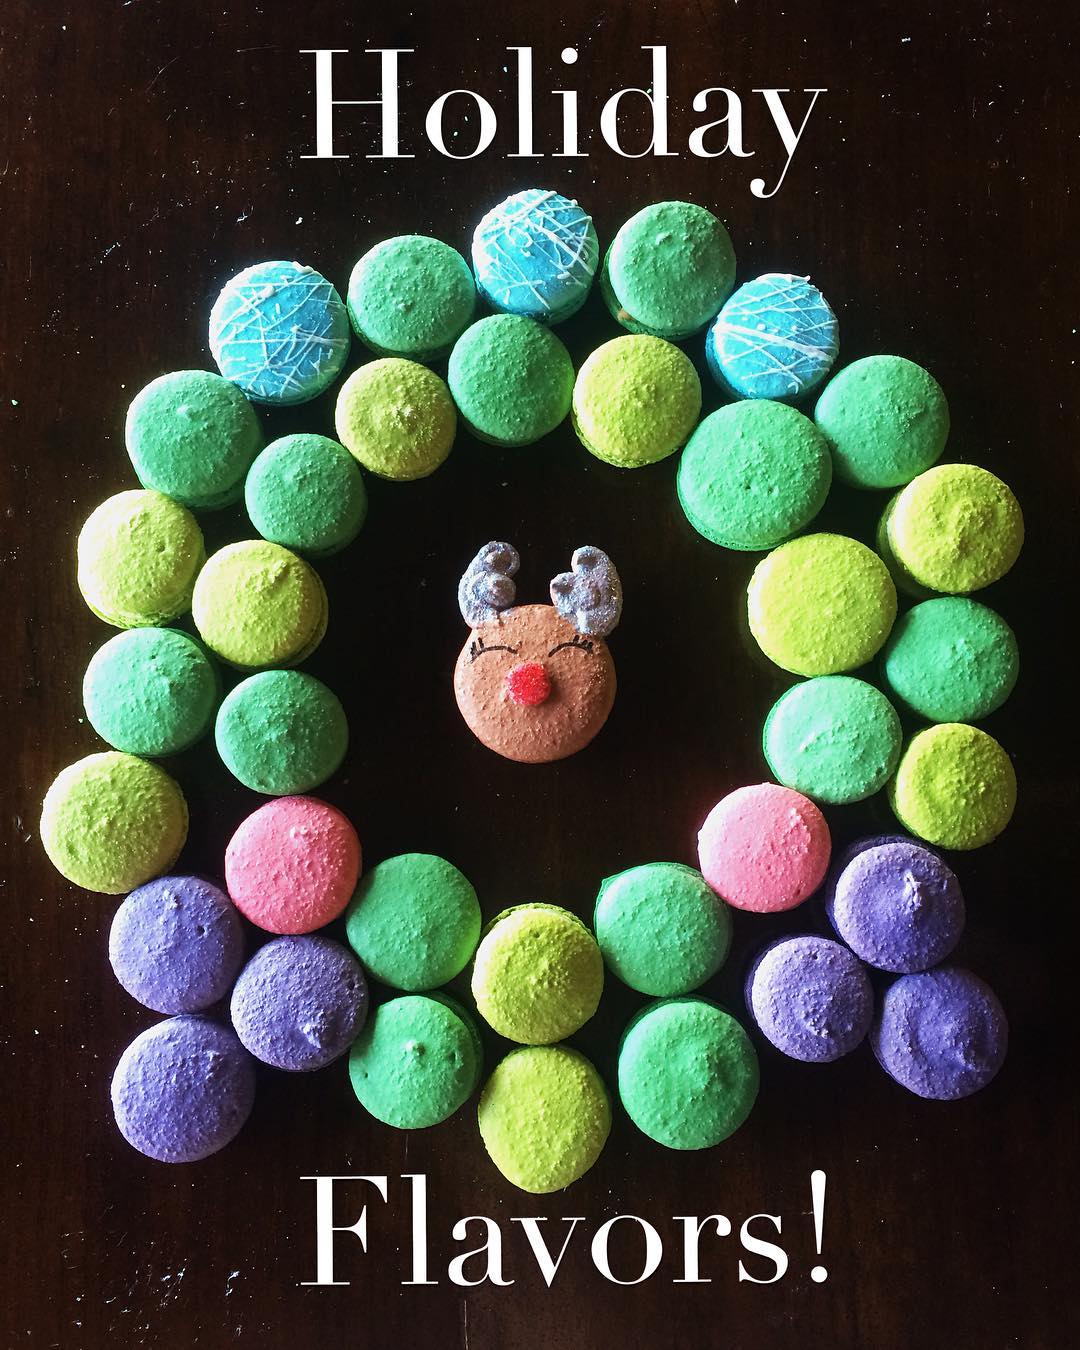 Our holiday flavors are here! Stop by and try Holiday Mulled Fruit, Mocha Mint, Biscoff and more! #Holiday #Macaron #Macarons #Reindeer #Christmas #Winter #okc #ShopSmall